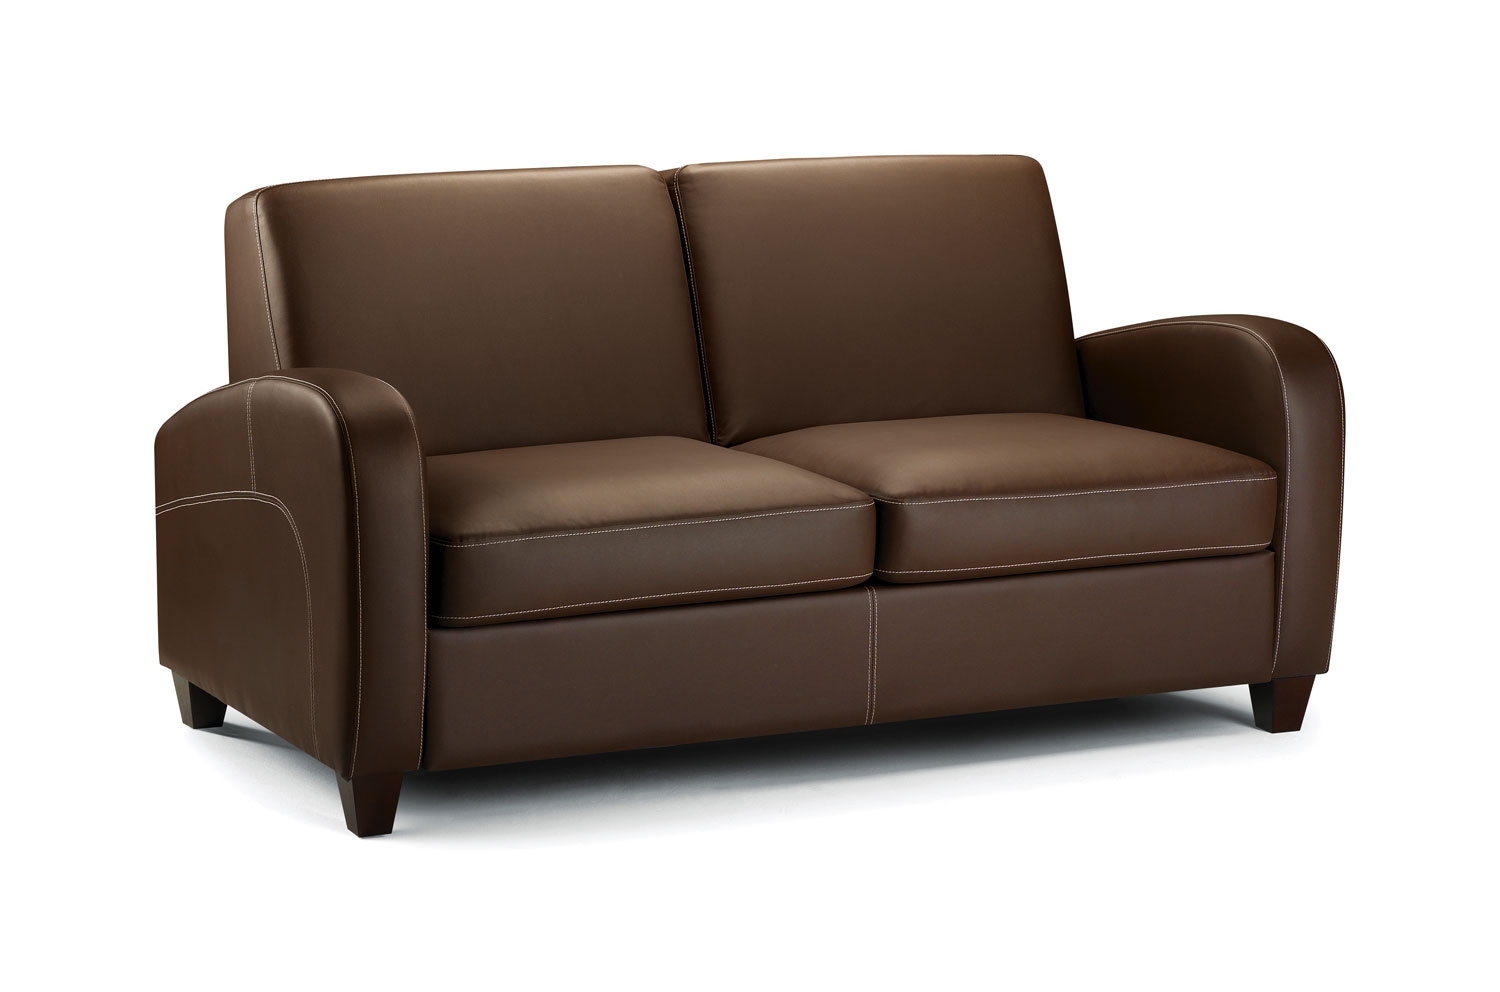 Chestnut Brown Faux Leather Sofa Bed